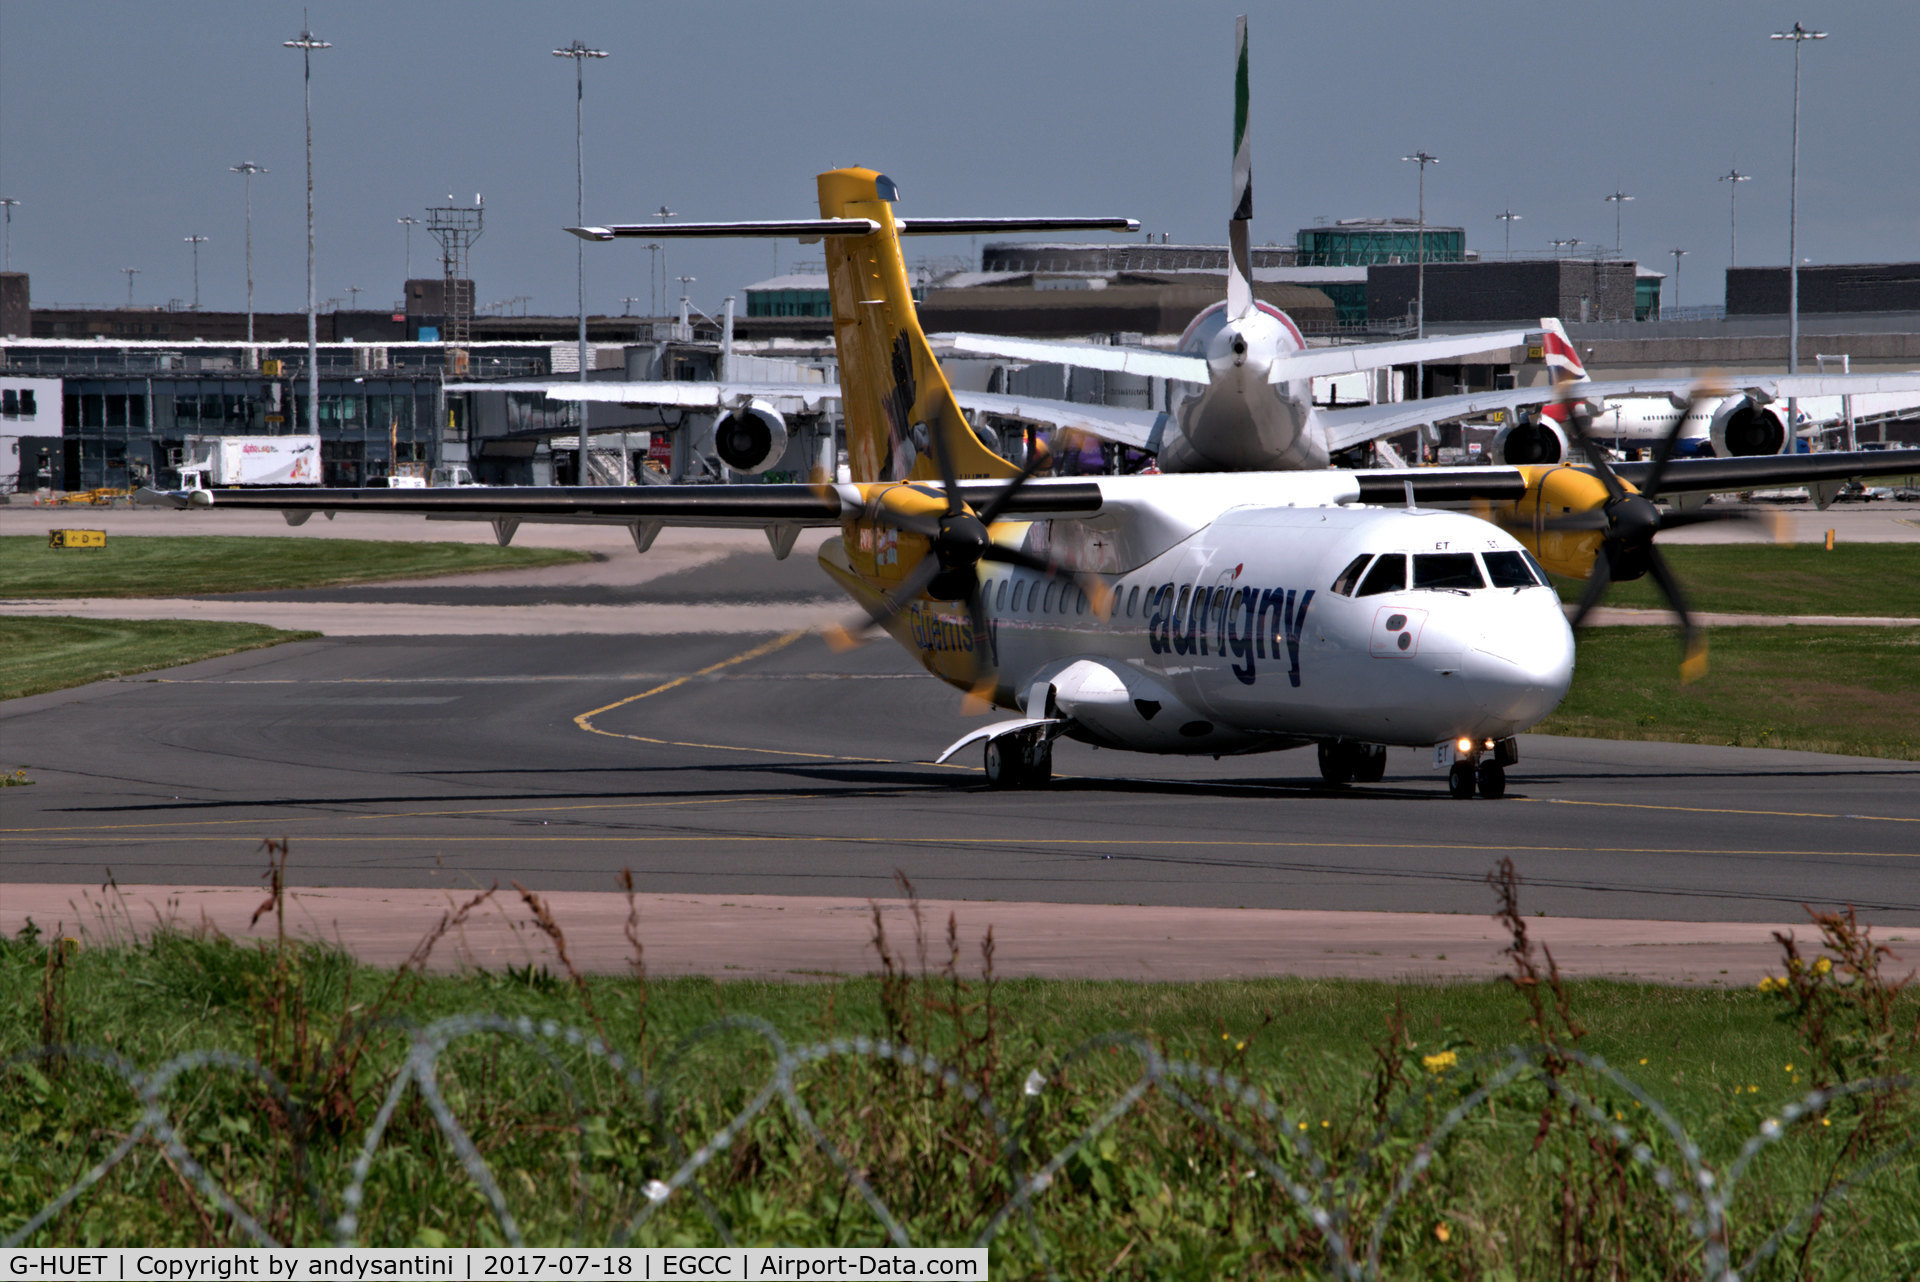 G-HUET, 1999 ATR 42-500 C/N 584, taxing out for take off